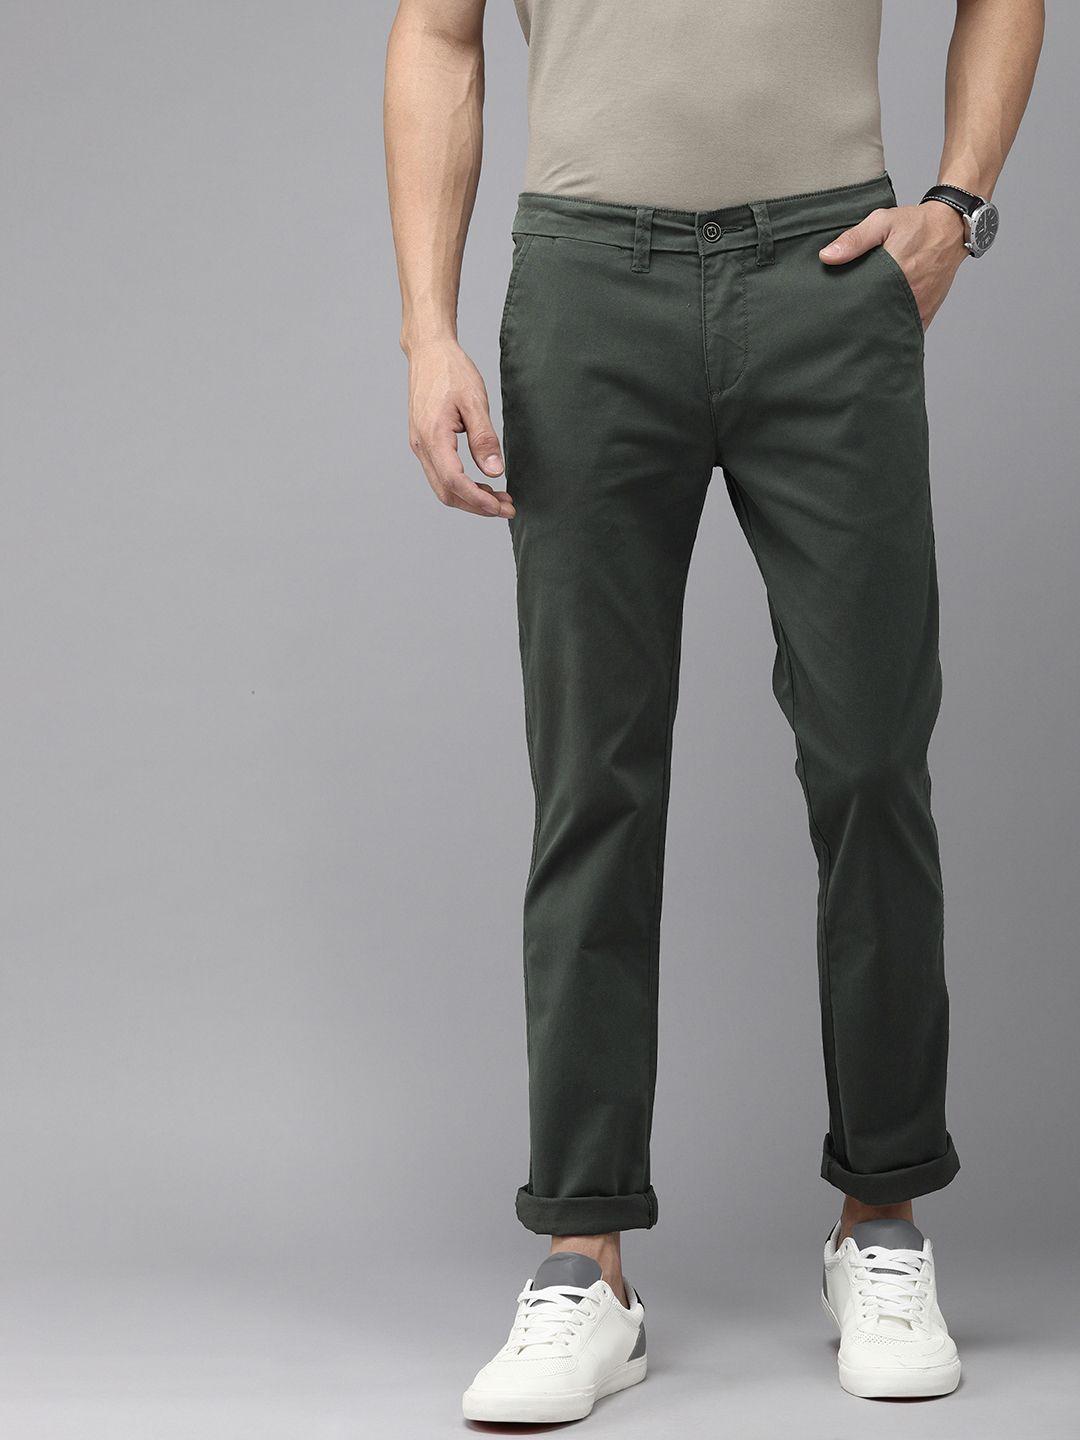 pepe jeans men olive green solid slim fit chinos trousers